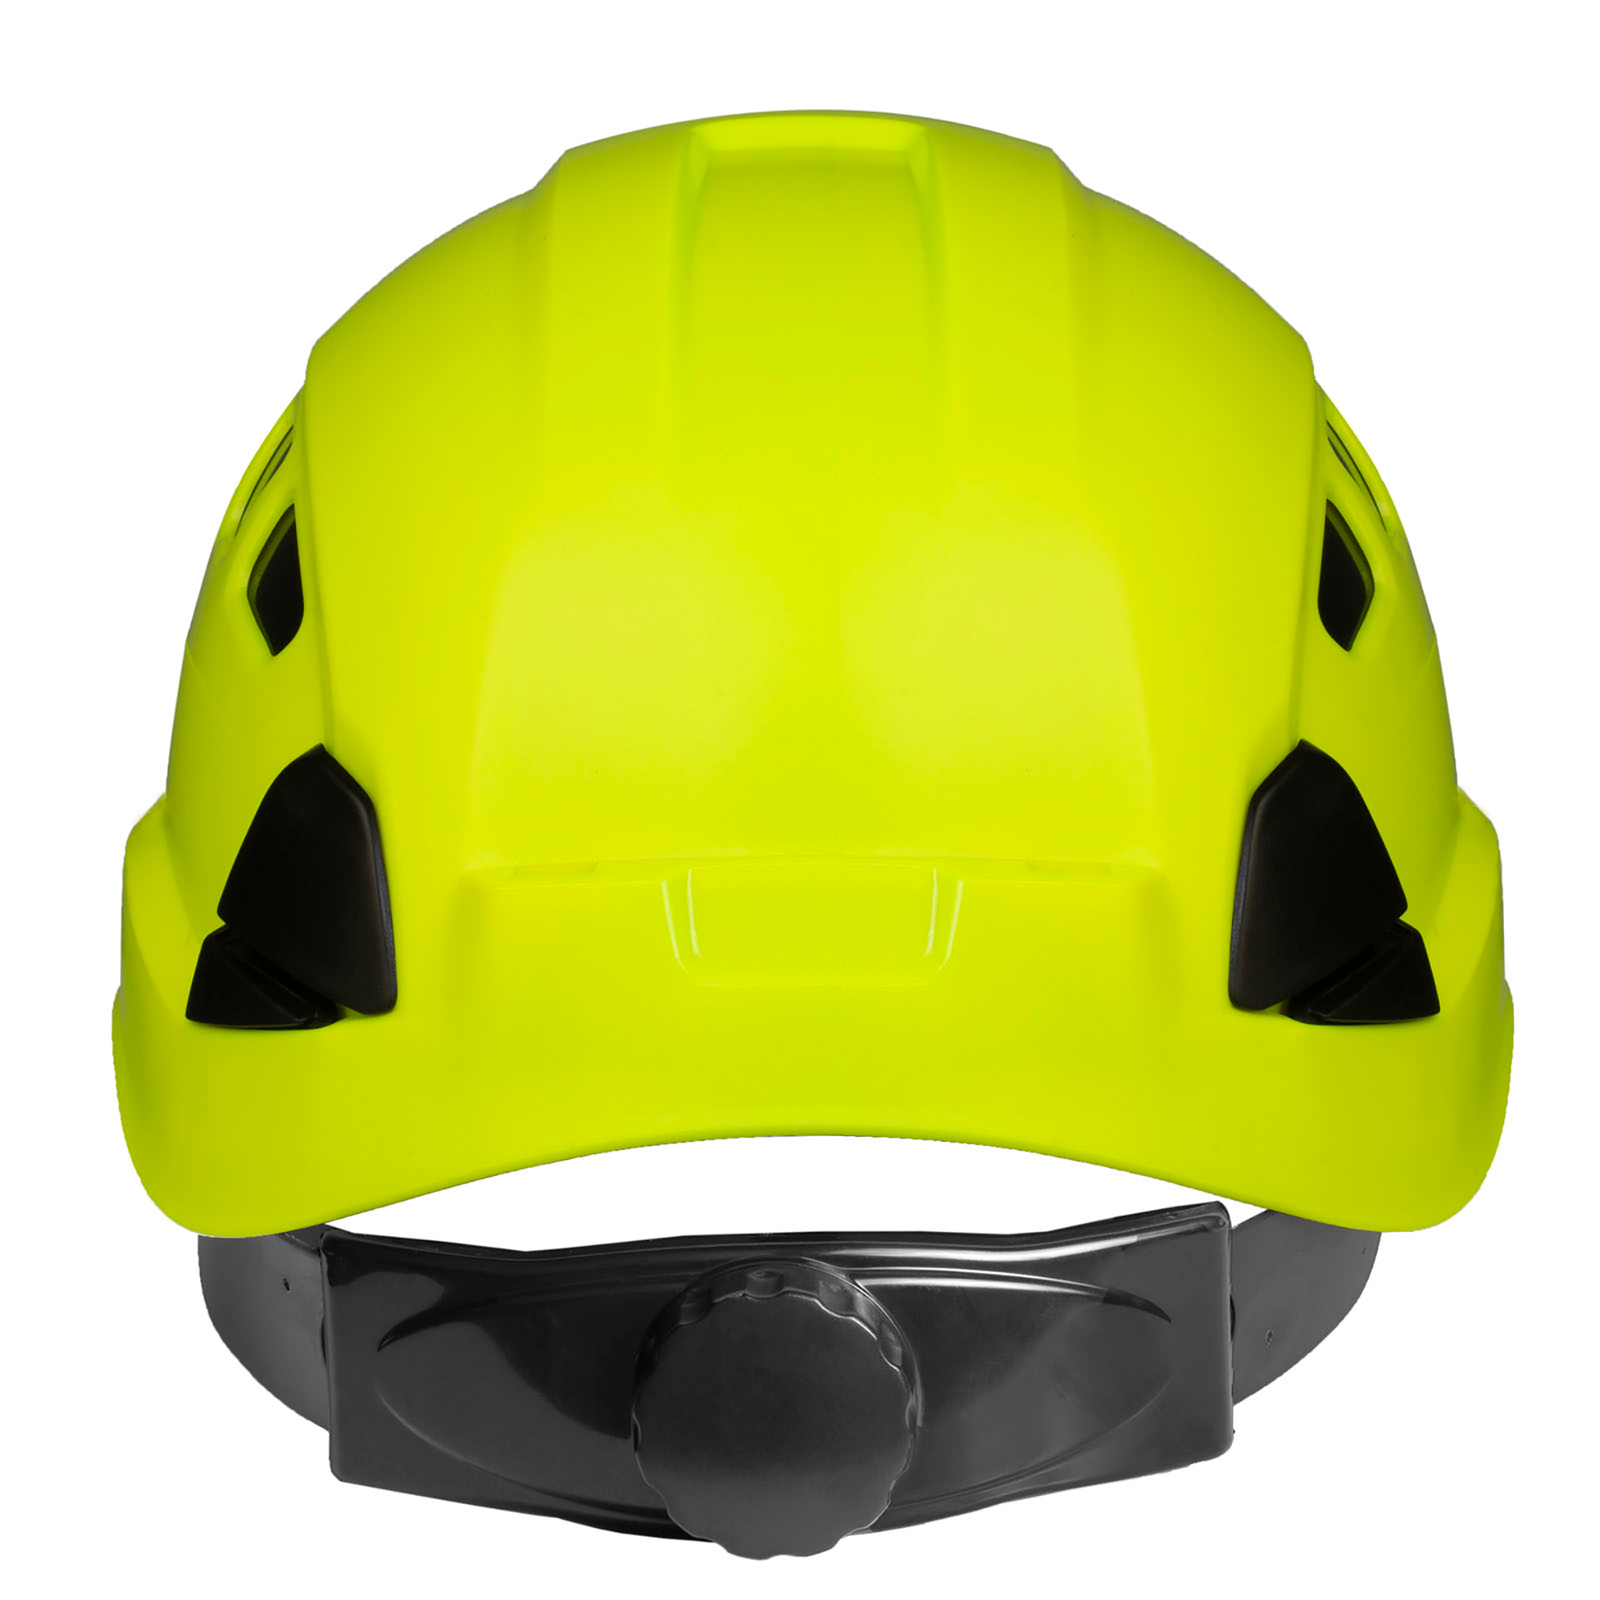 The Jorestech lime ventilated hard hat with adjustable 6 point suspension. It shows the black ratchet system